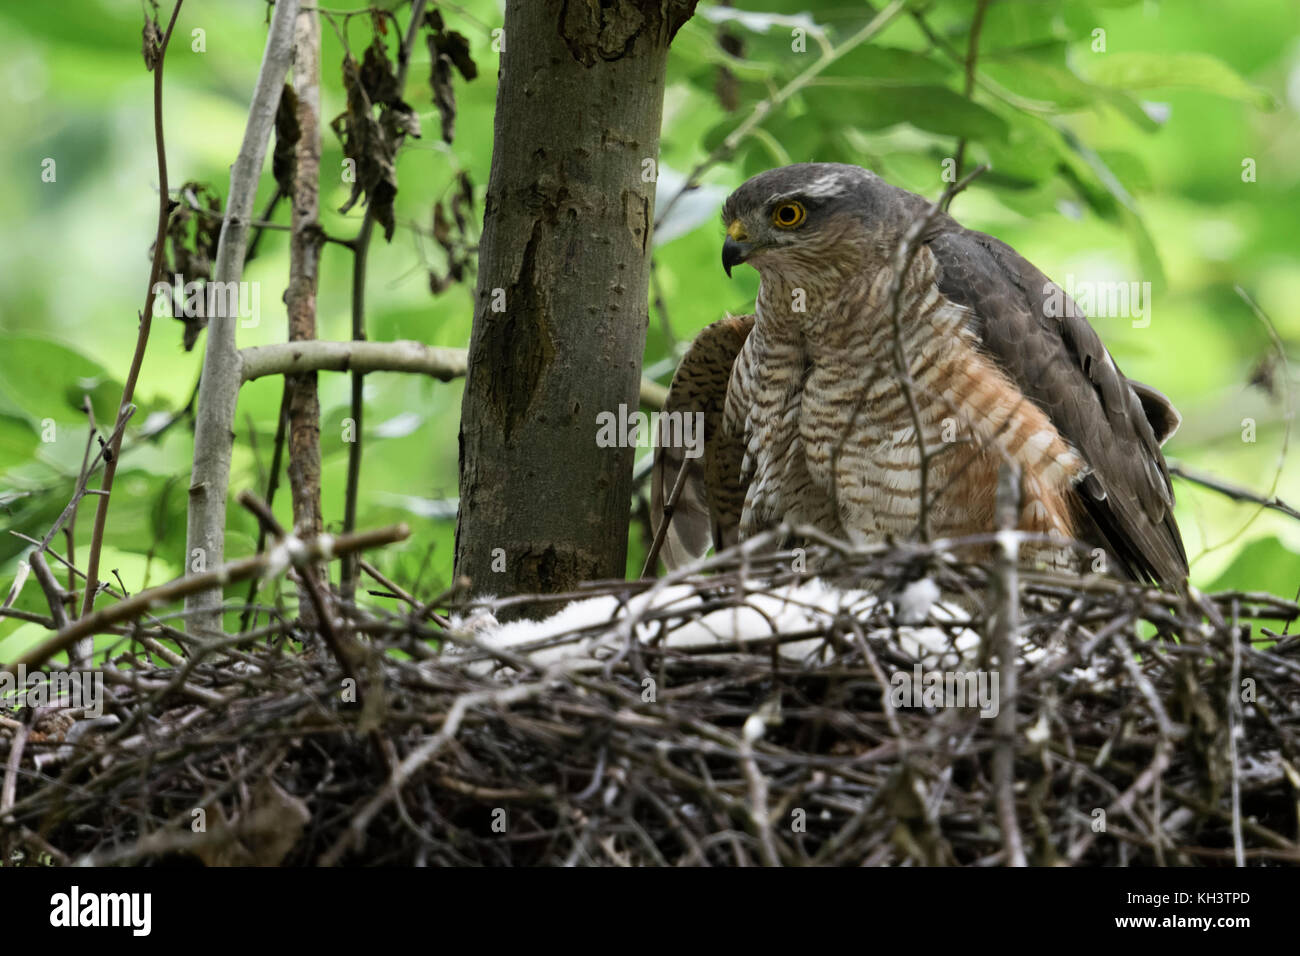 Sparrowhawk / Sperber ( Accipiter nisus ), adult female sitting, perched on the edge of its nest, caring for its chicks, watching attentively, wildlif Stock Photo